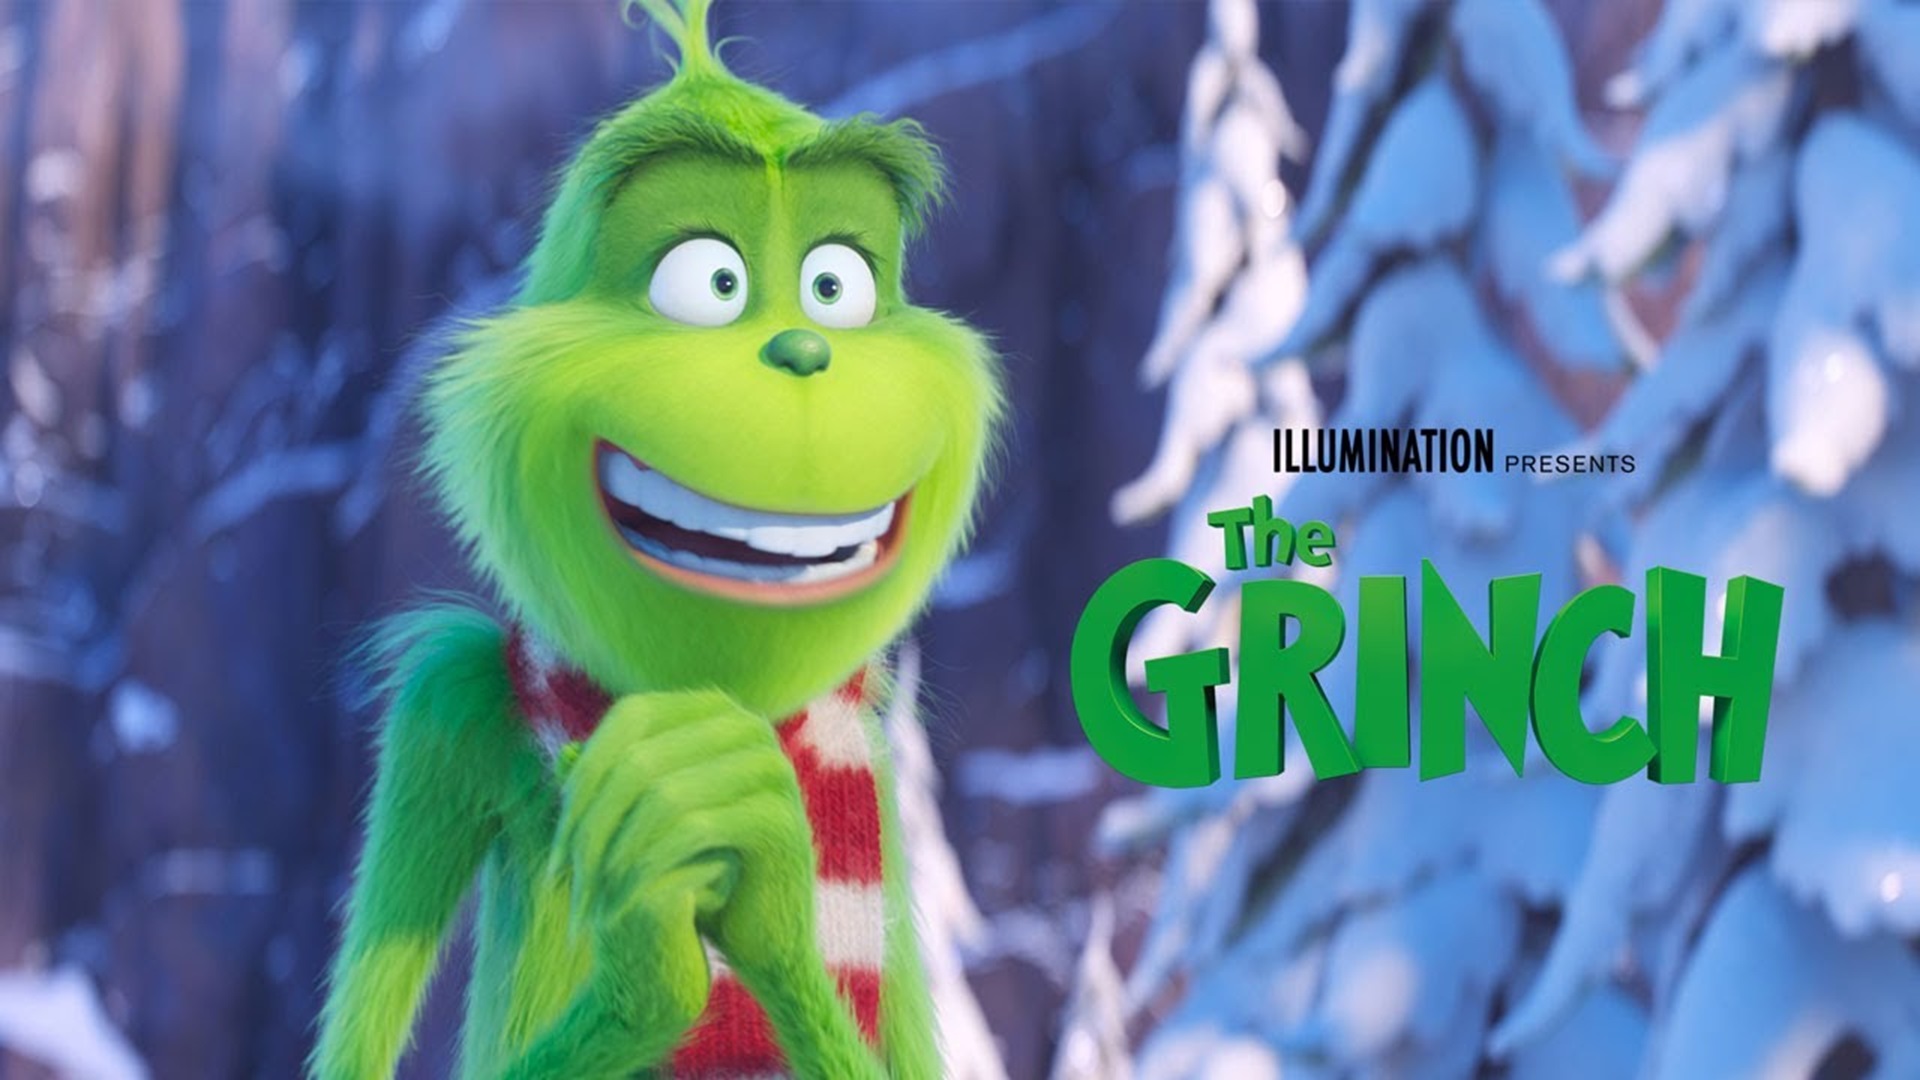 <p>Our favorite 'Grinch' movie is this animated version from 2018, which was produced by the same animation studio that gave us 'Despicable Me.' We all know this classic story of the grouchy green creature that is trying to ruin Christmas in Whoville, and it is worth watching every year!</p>